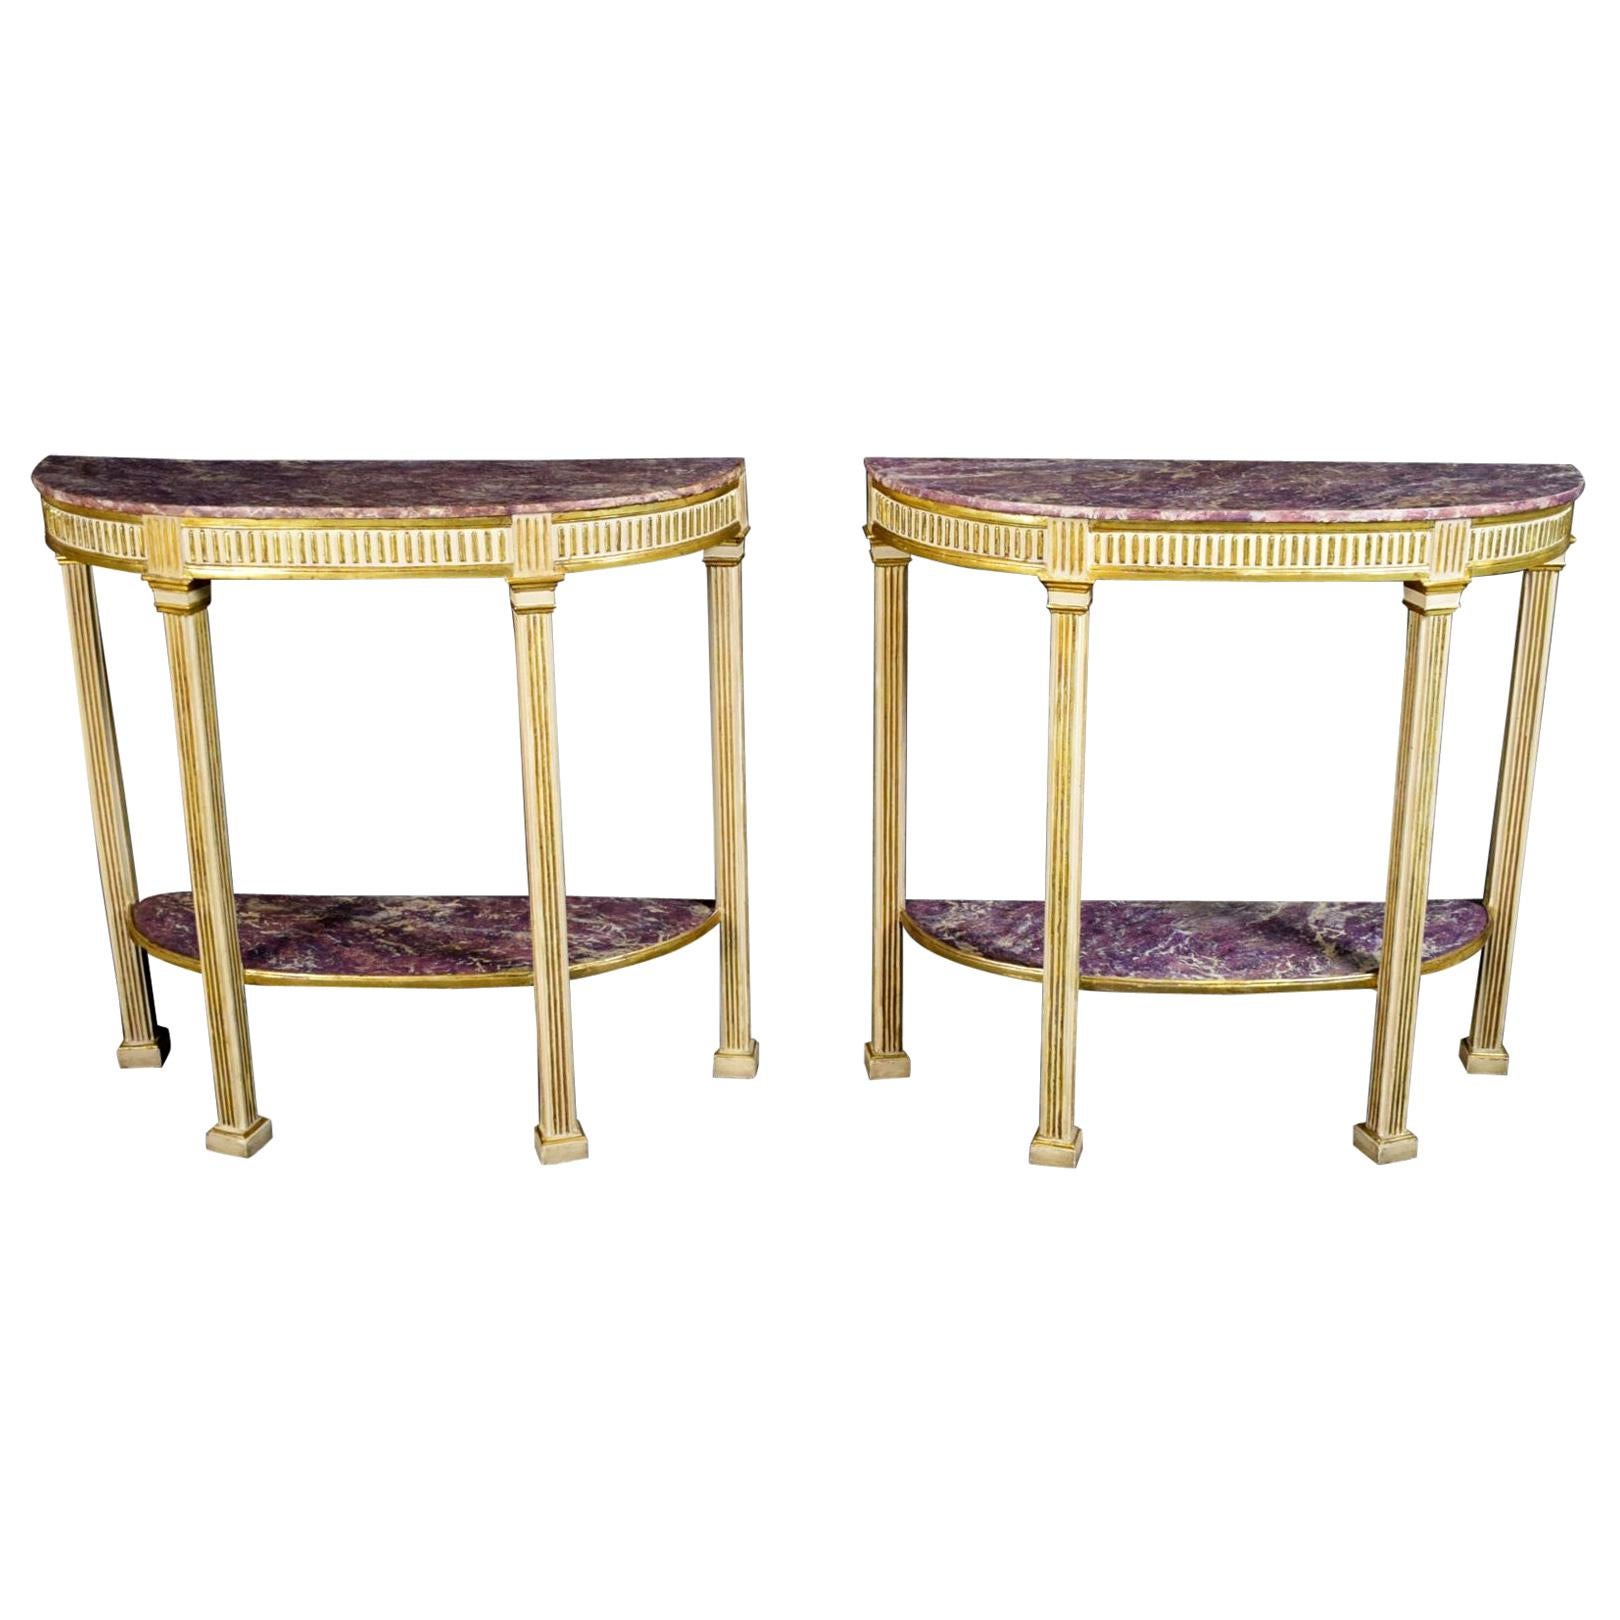 18th Century, Pair of Italian Neoclassical Lacquered and Giltwood Consoles